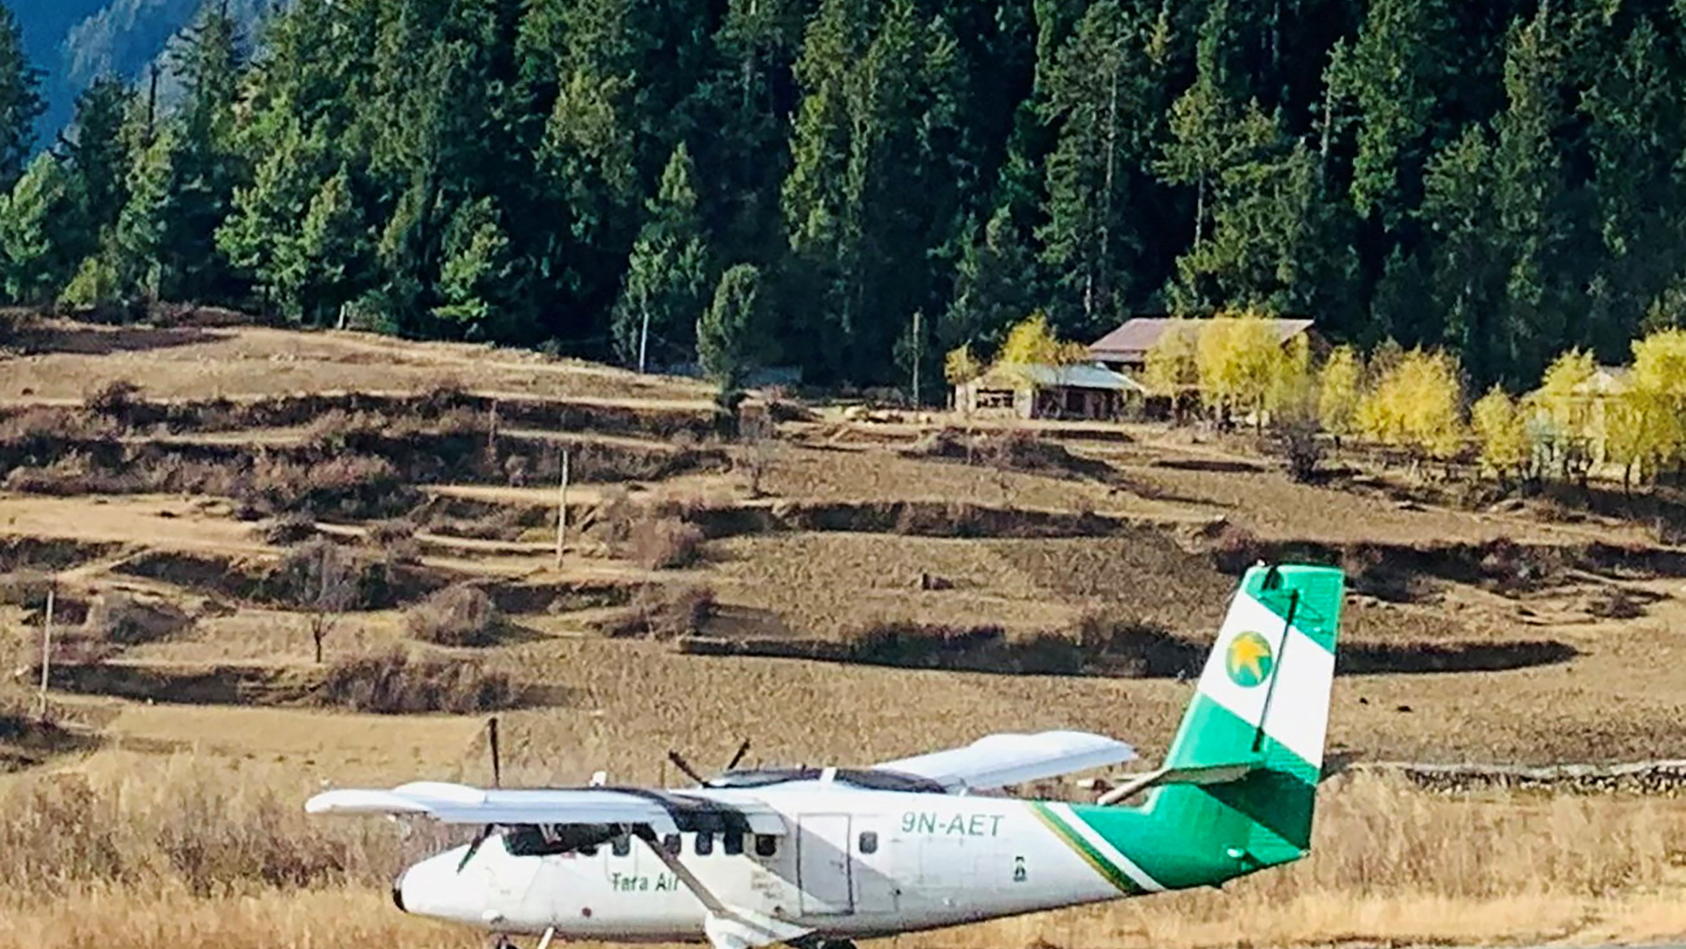 Handout image shows Tara Air's DHC-6 Twin Otter, tail number 9N-AET, in Simikot, Nepal December 1, 2021. Picture taken December 1, 2021. Madhu Thapa/Handout via REUTERS ATTENTION EDITORS - THIS IMAGE HAS BEEN SUPPLIED BY A THIRD PARTY. NO RESALES. NO